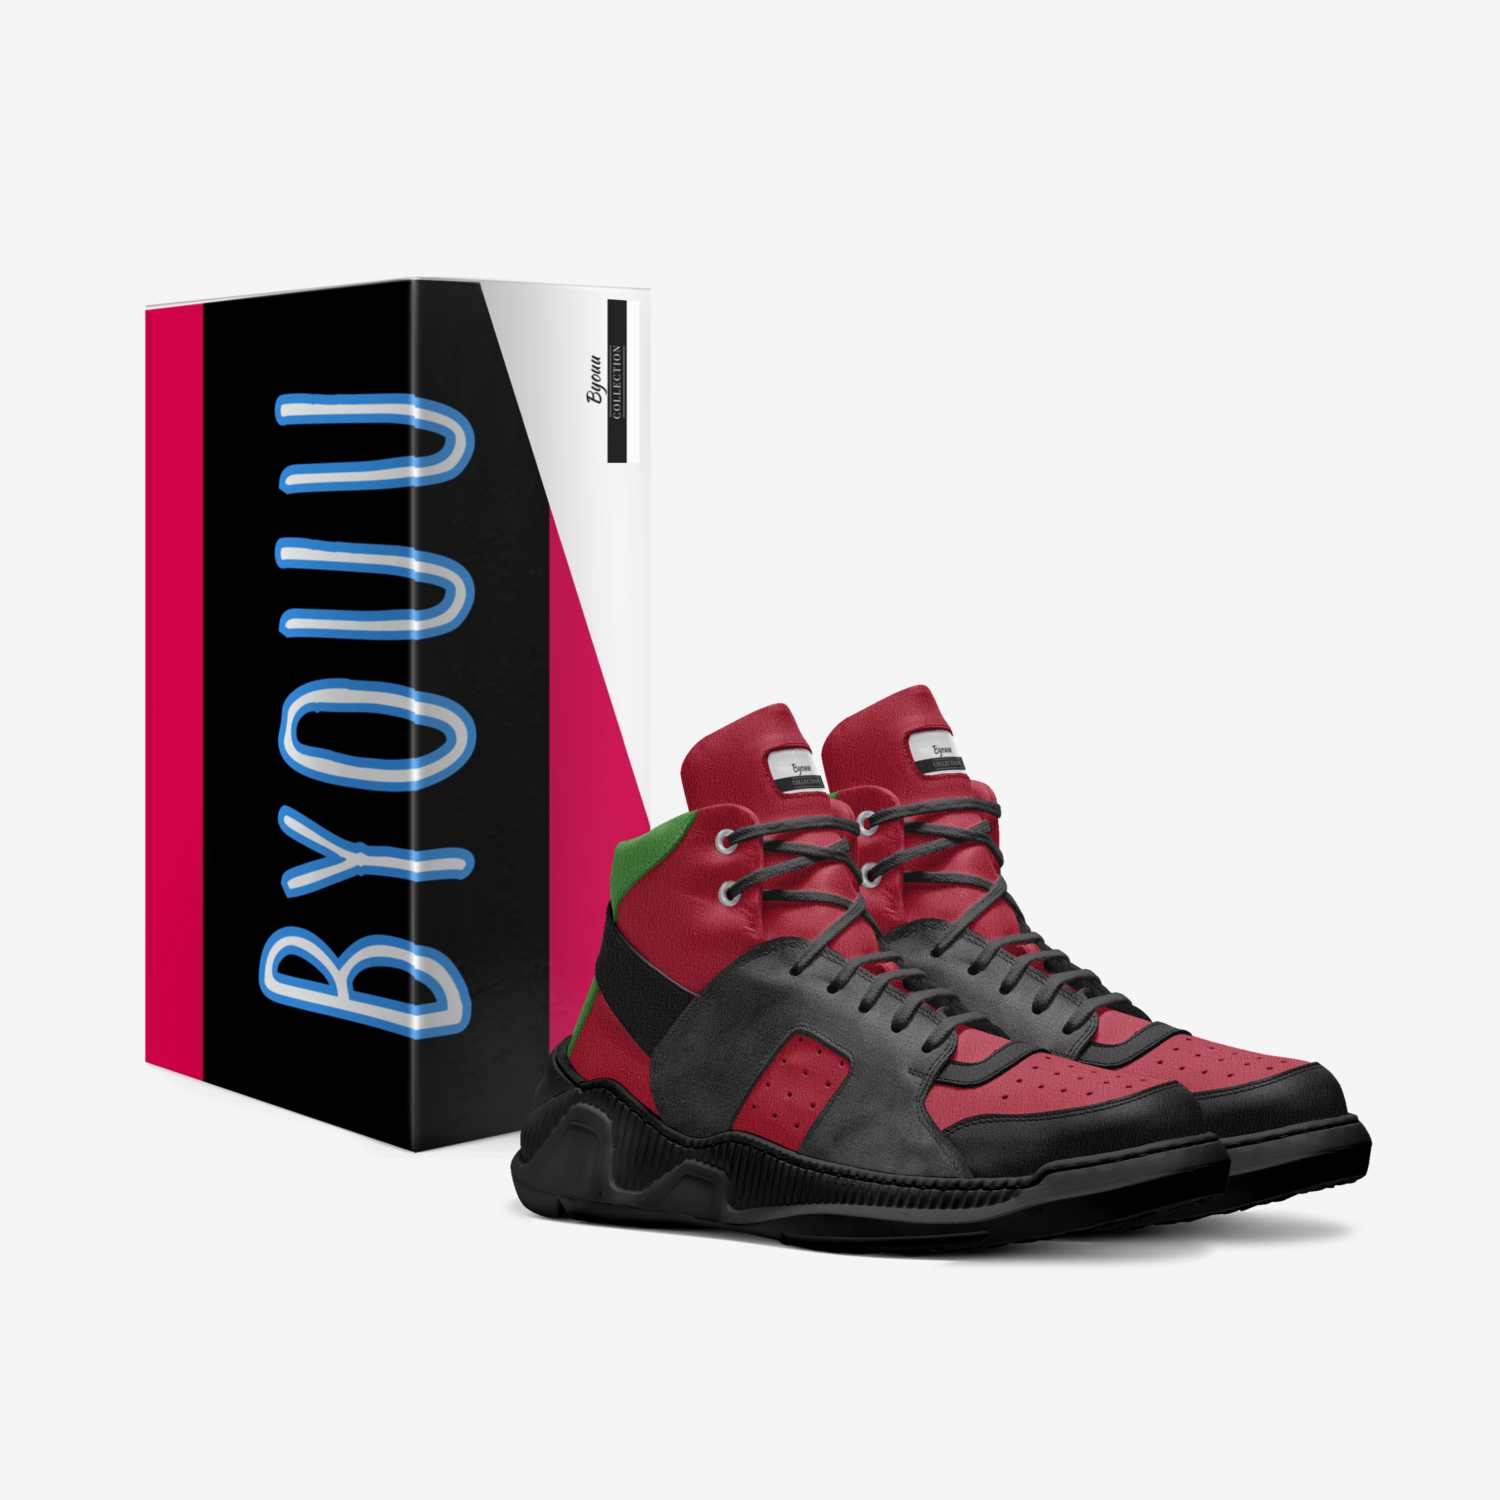 Byouu custom made in Italy shoes by Omar Butler | Box view